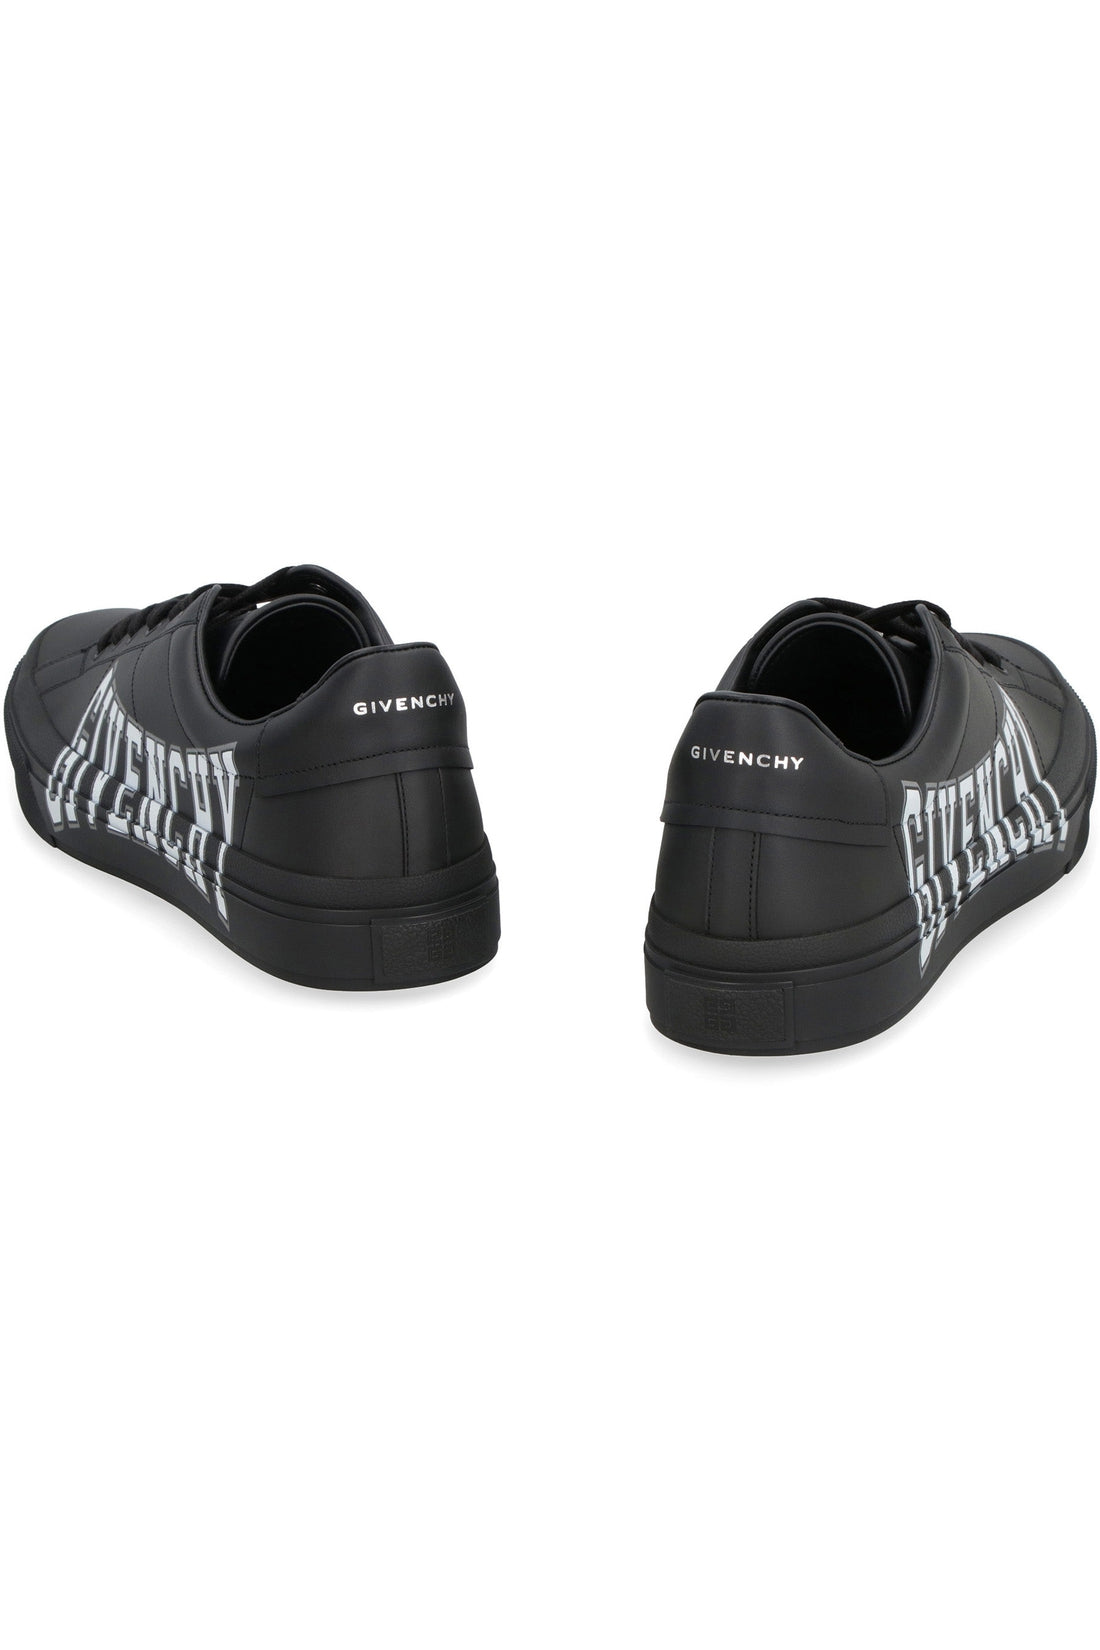 Givenchy-OUTLET-SALE-City Sport low-top sneakers-ARCHIVIST